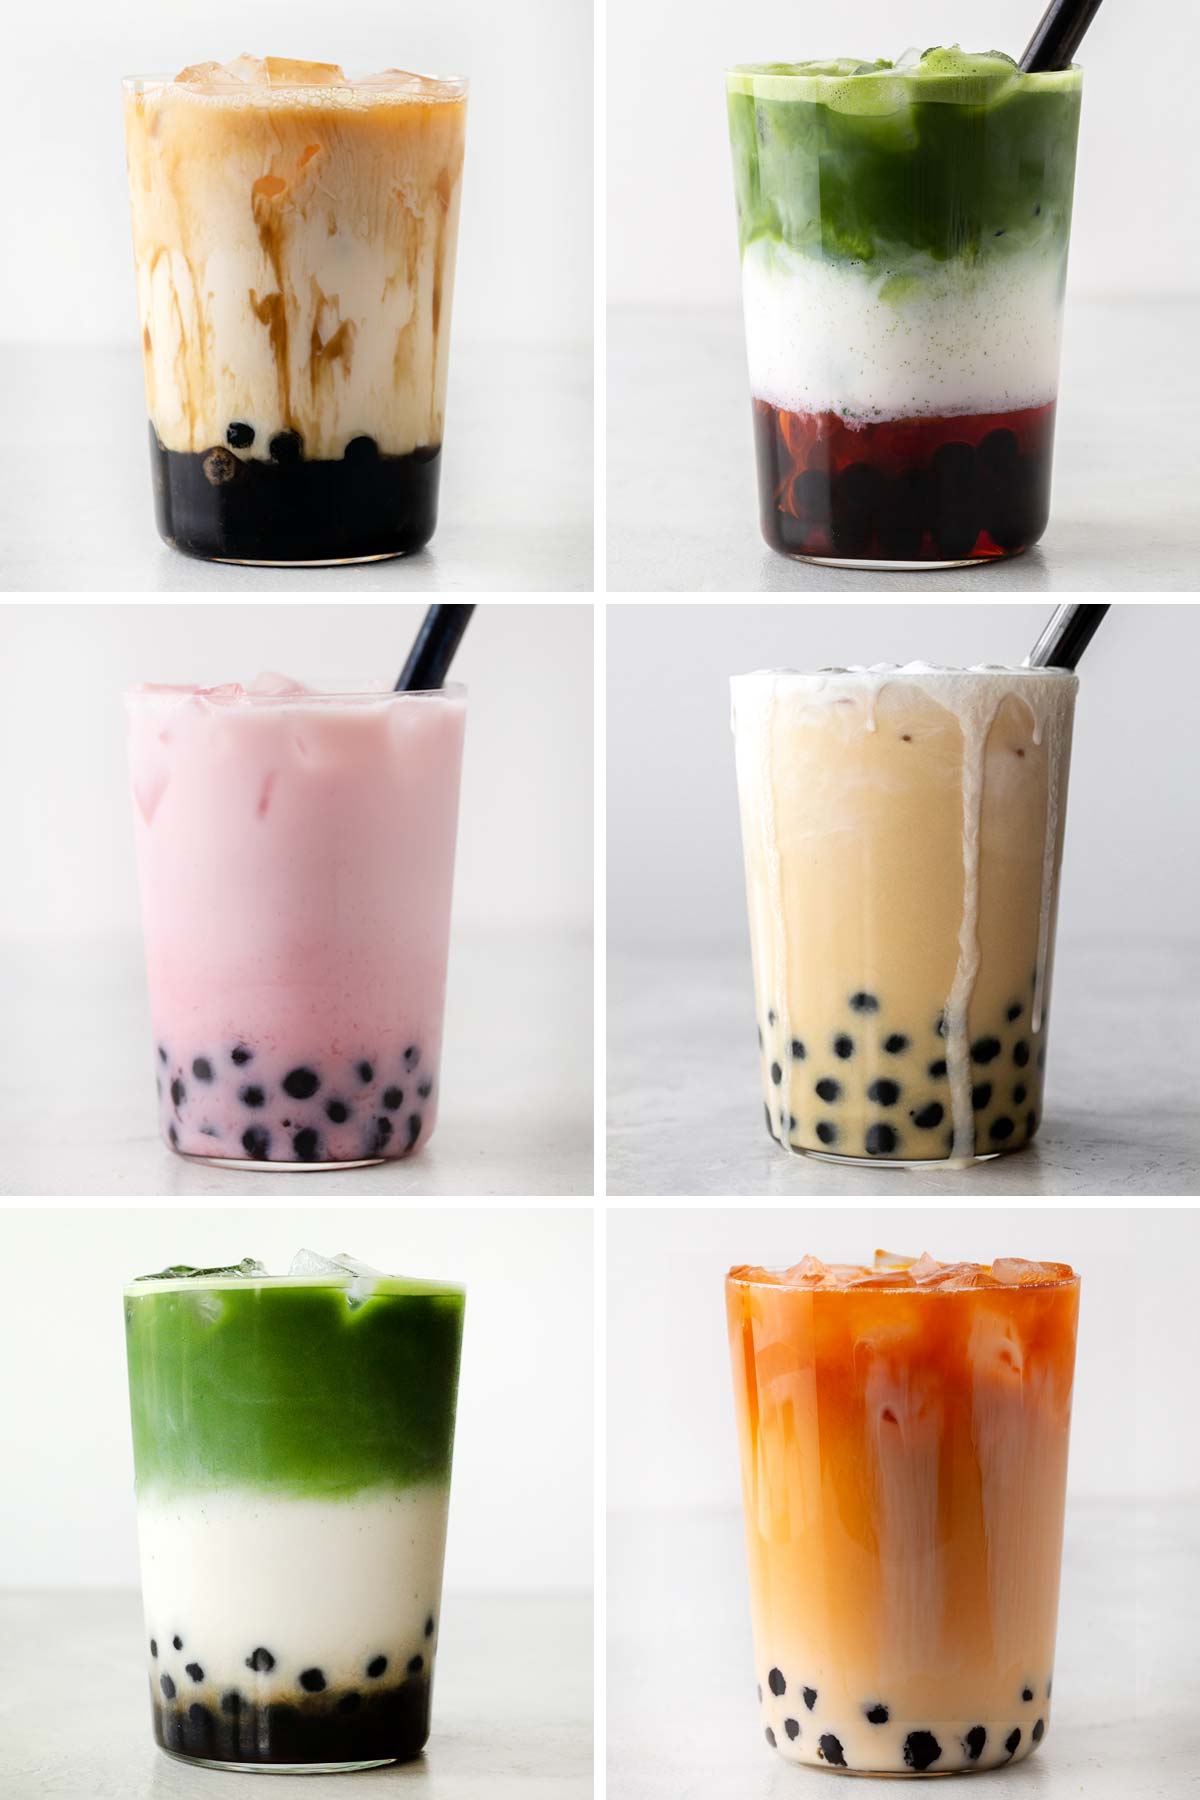 What's the Tea? Boba vs. Bubble - The Ultimate Difference